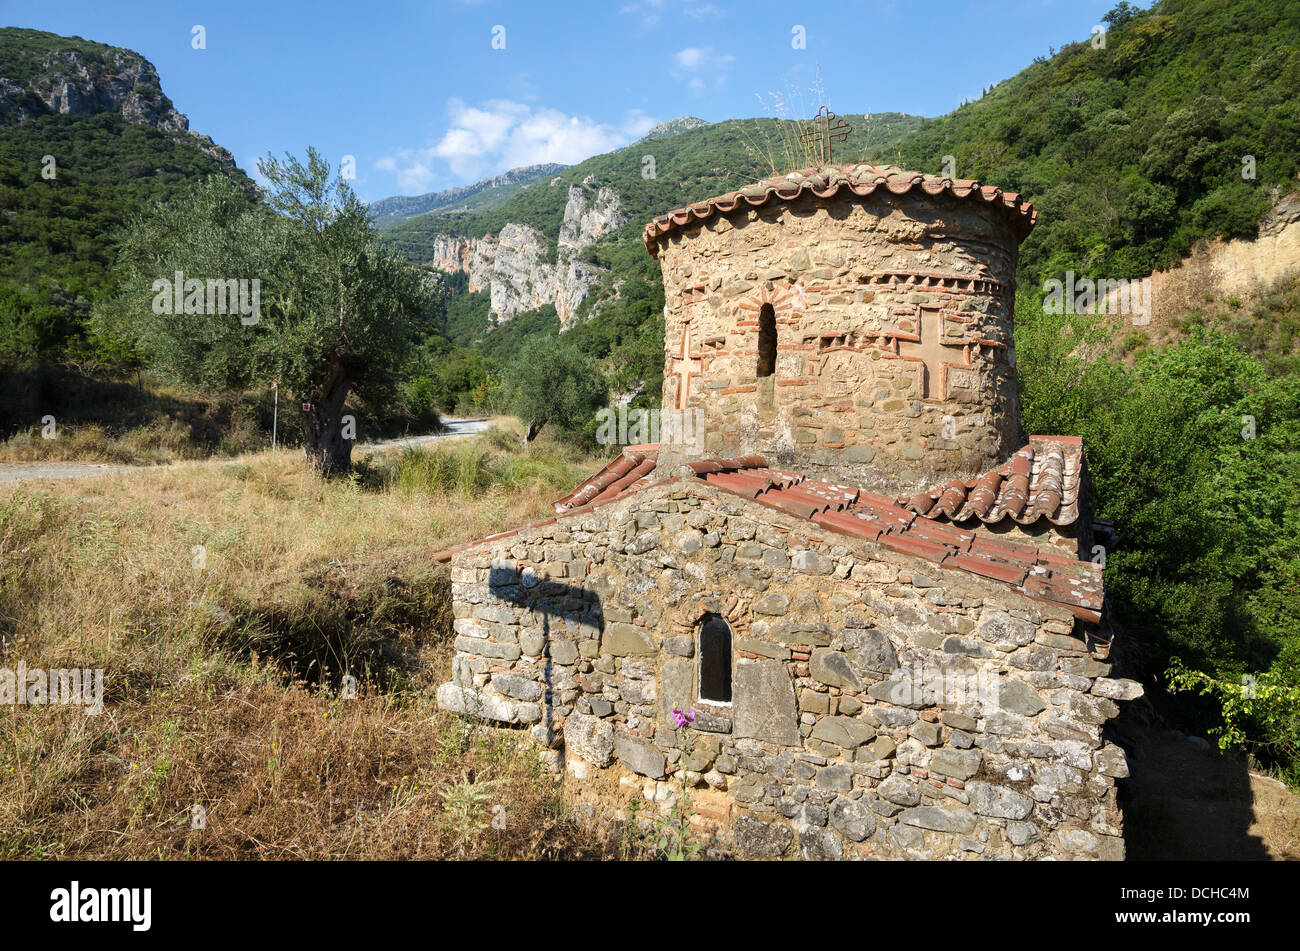 Byzantine church of Agios Andreas, set deep in the Lousios Gorge by Ancient Gortys, Arcadia, central Peloponnese, Greece. Stock Photo